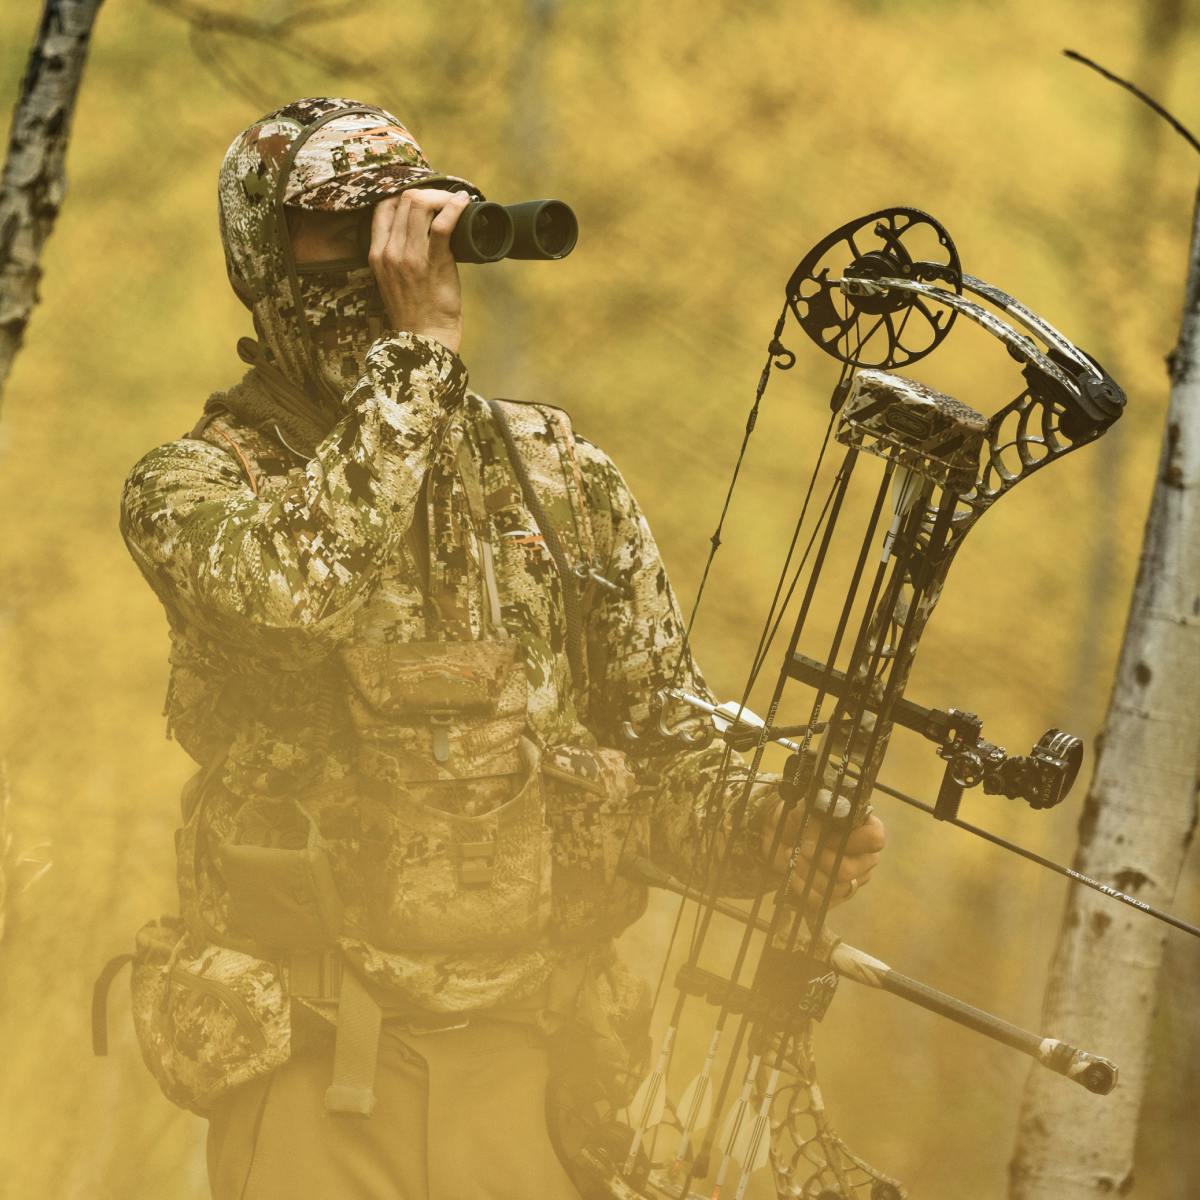 SITKA Gear | Turning Clothing Into Gear